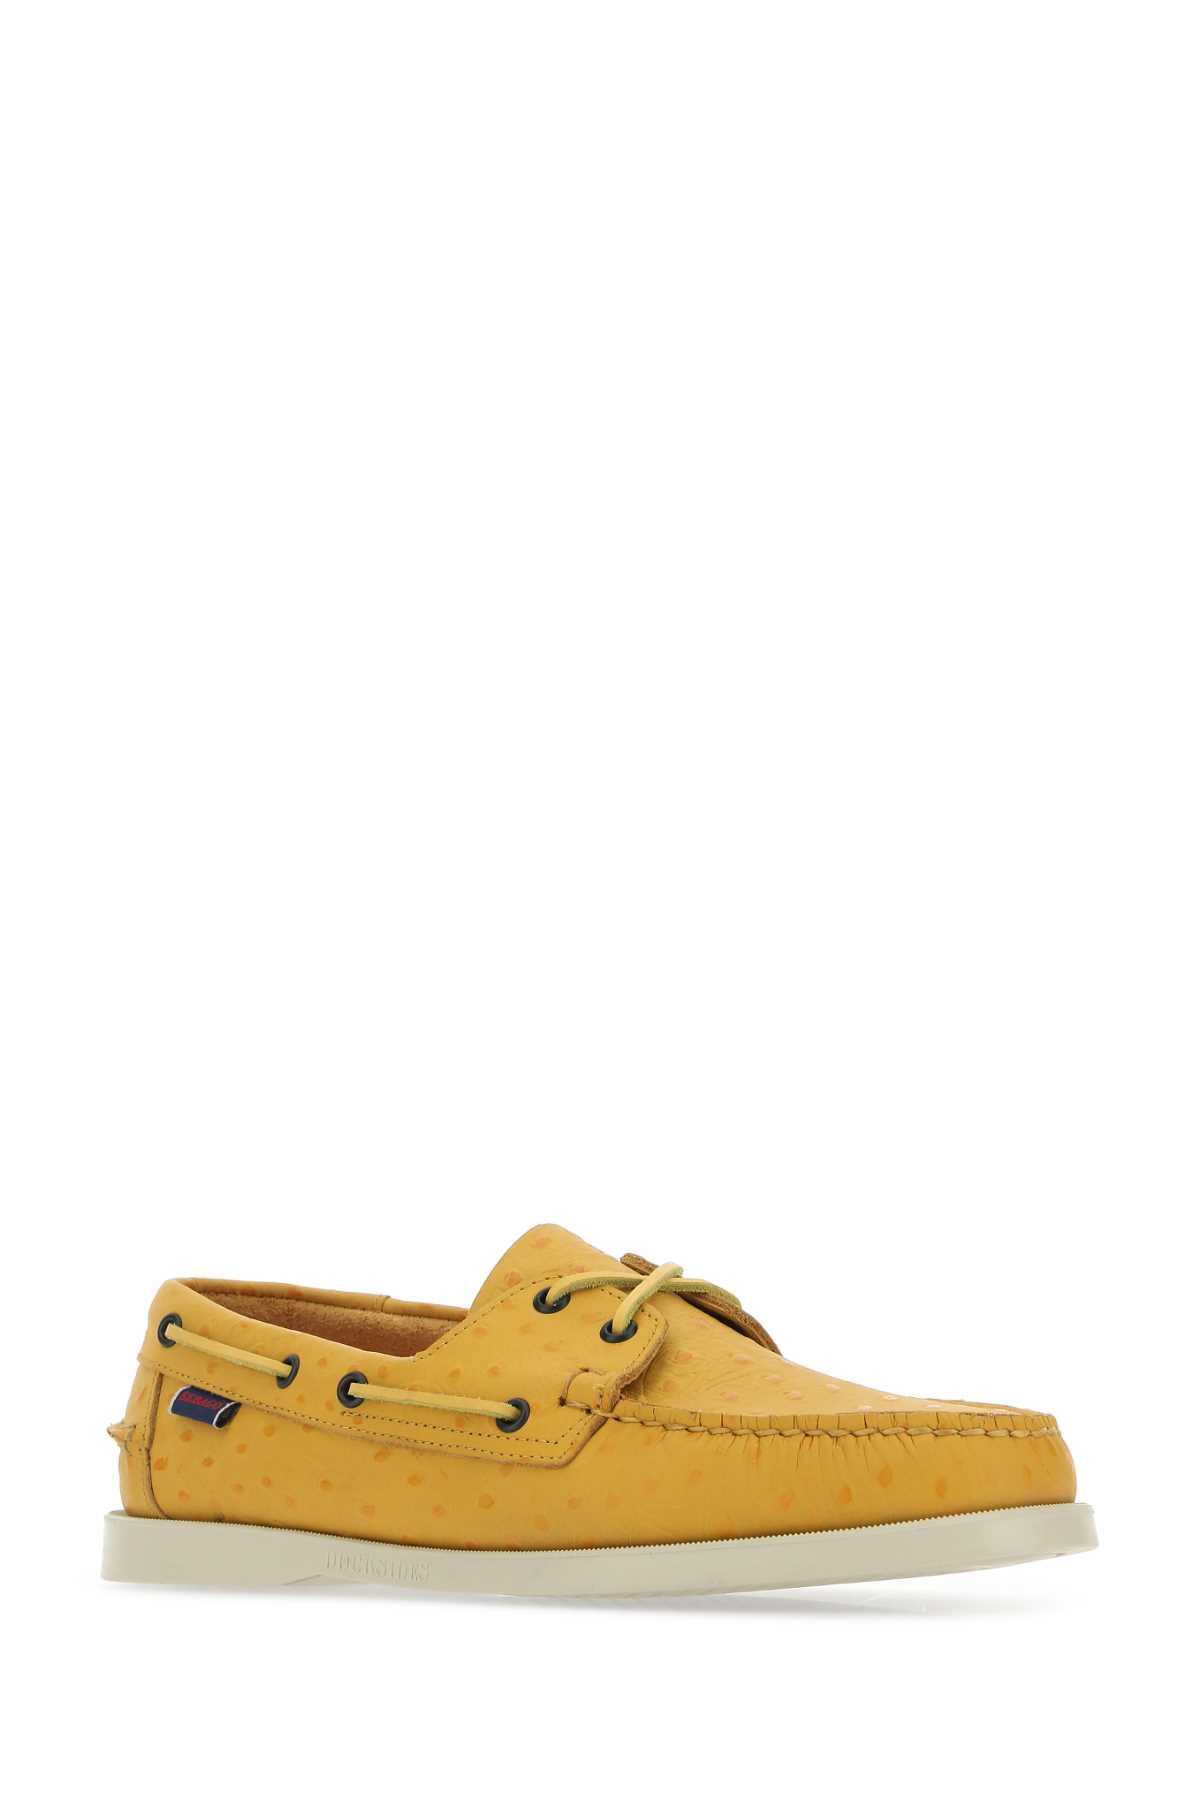 Sebago Yellow Leather Docksides Loafers In Xq9